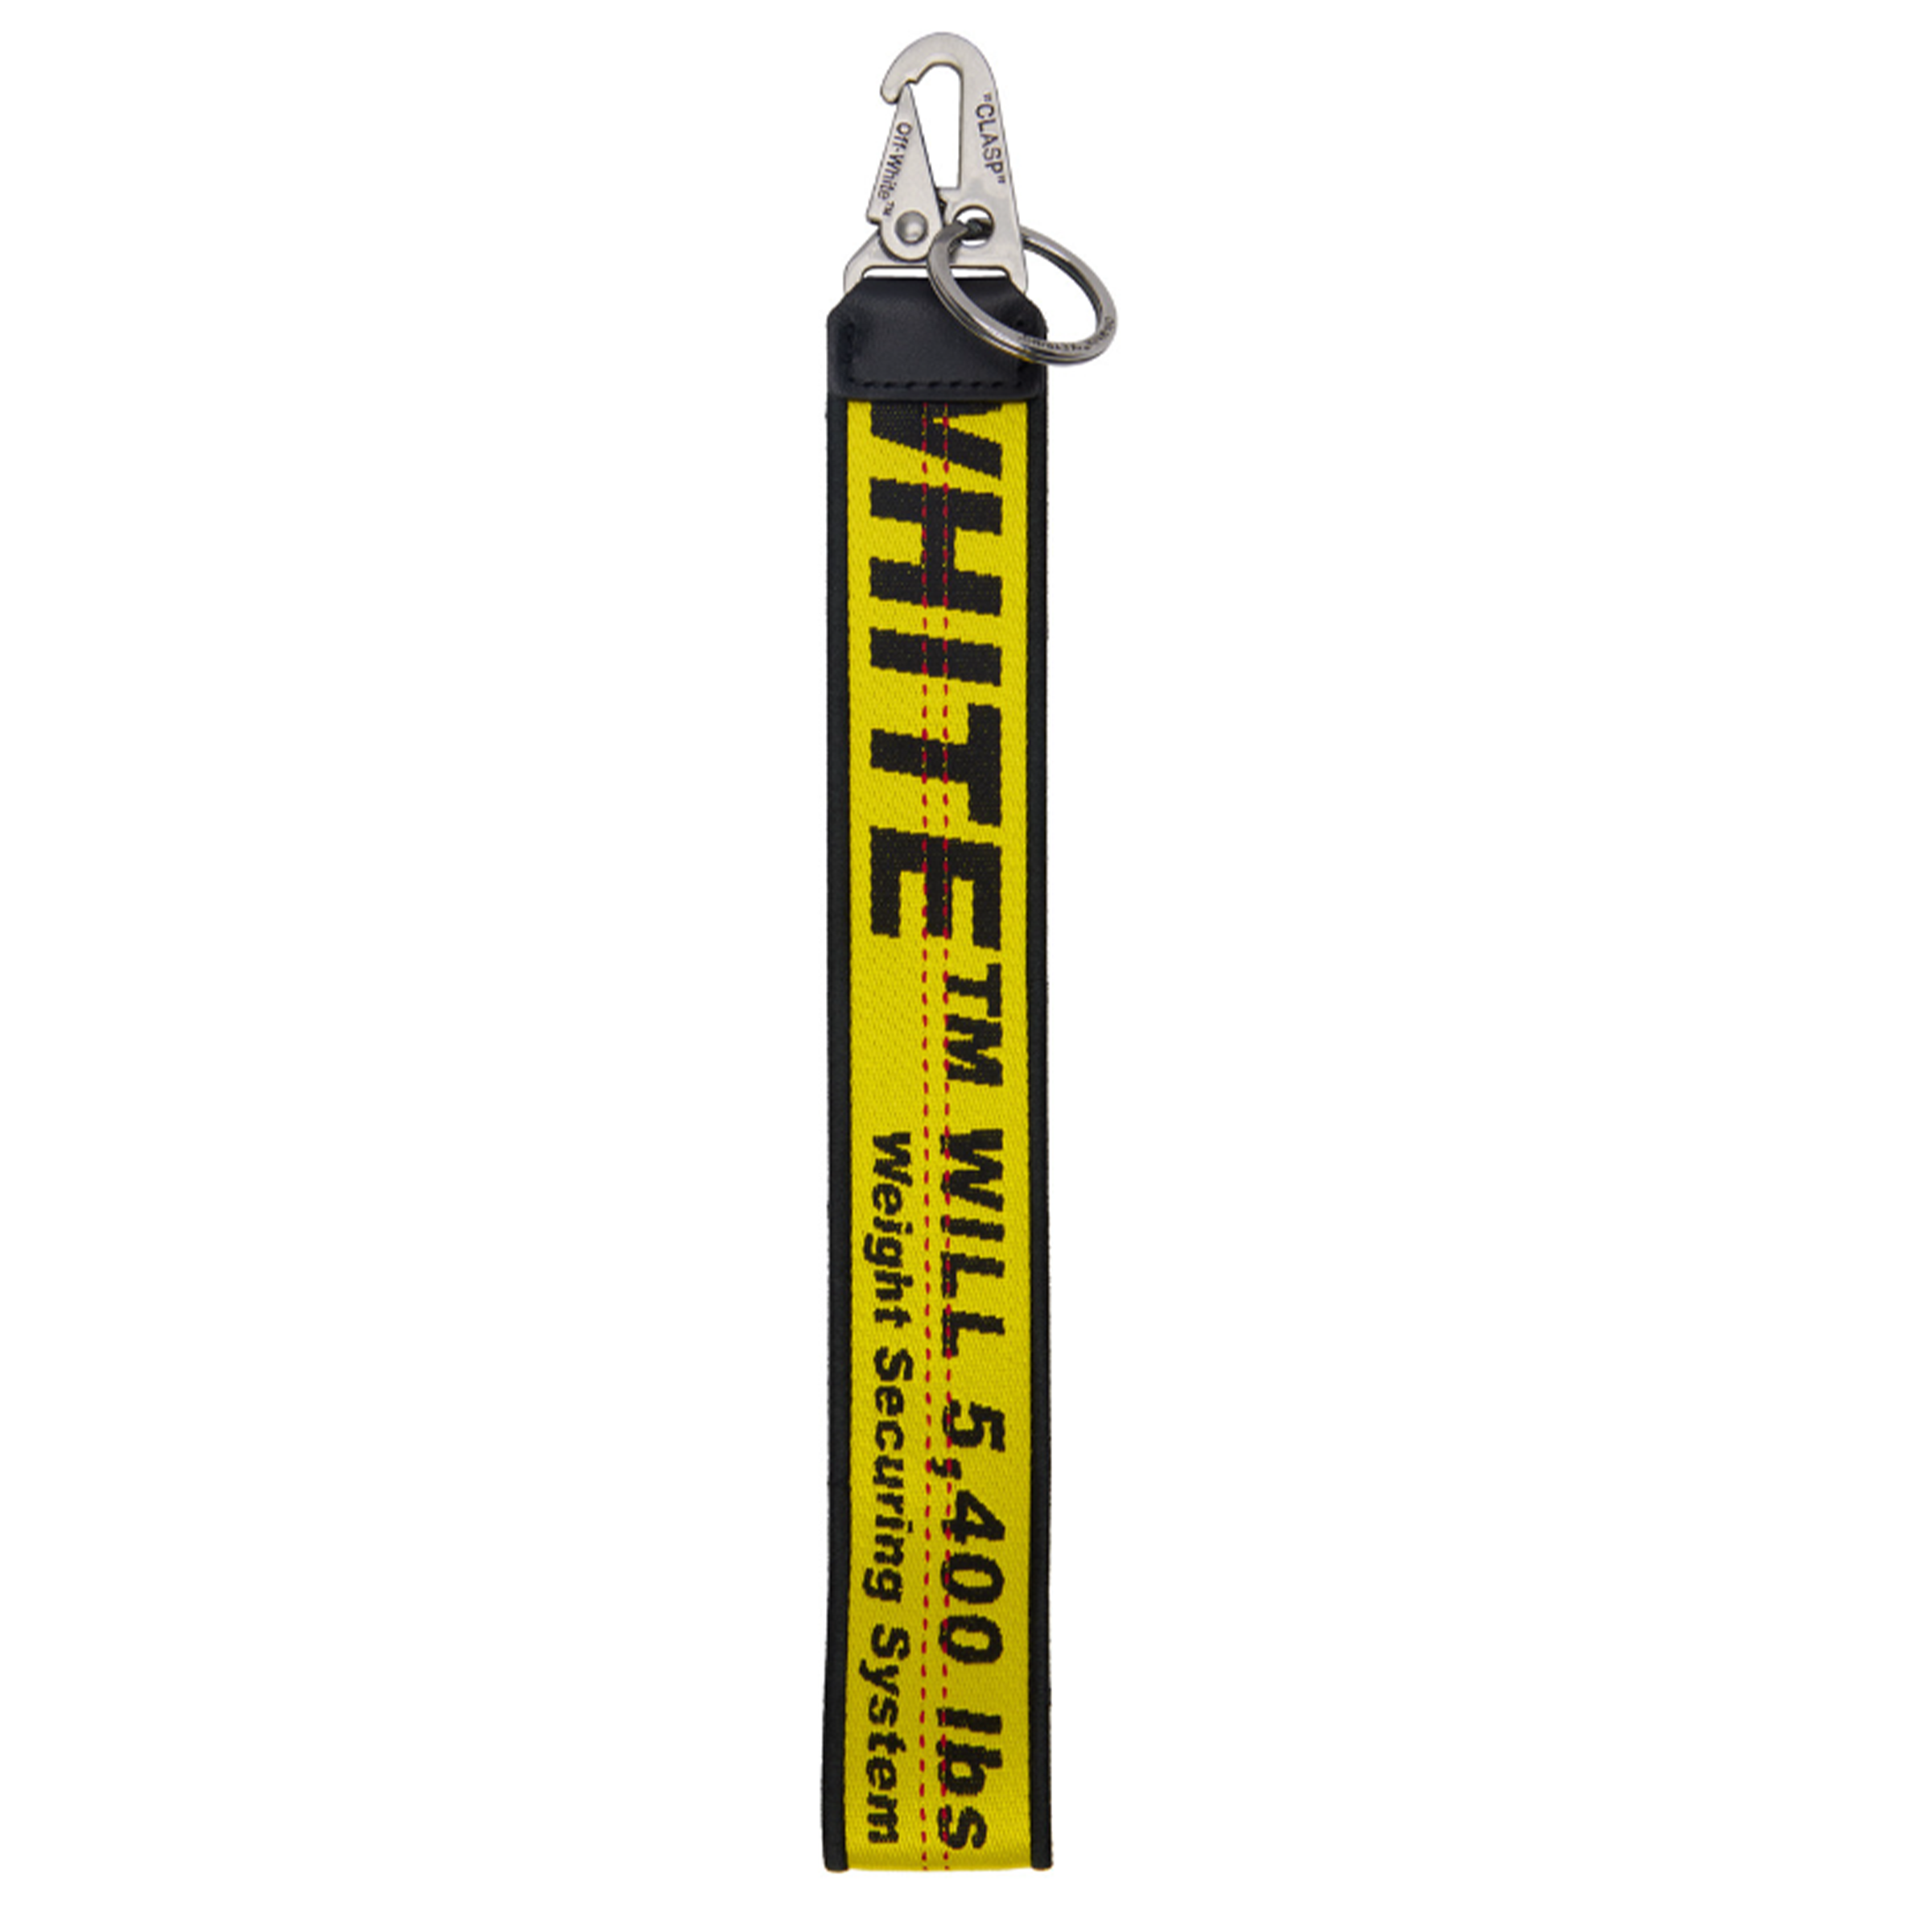 Off-White "Yellow Industrial" Keychain